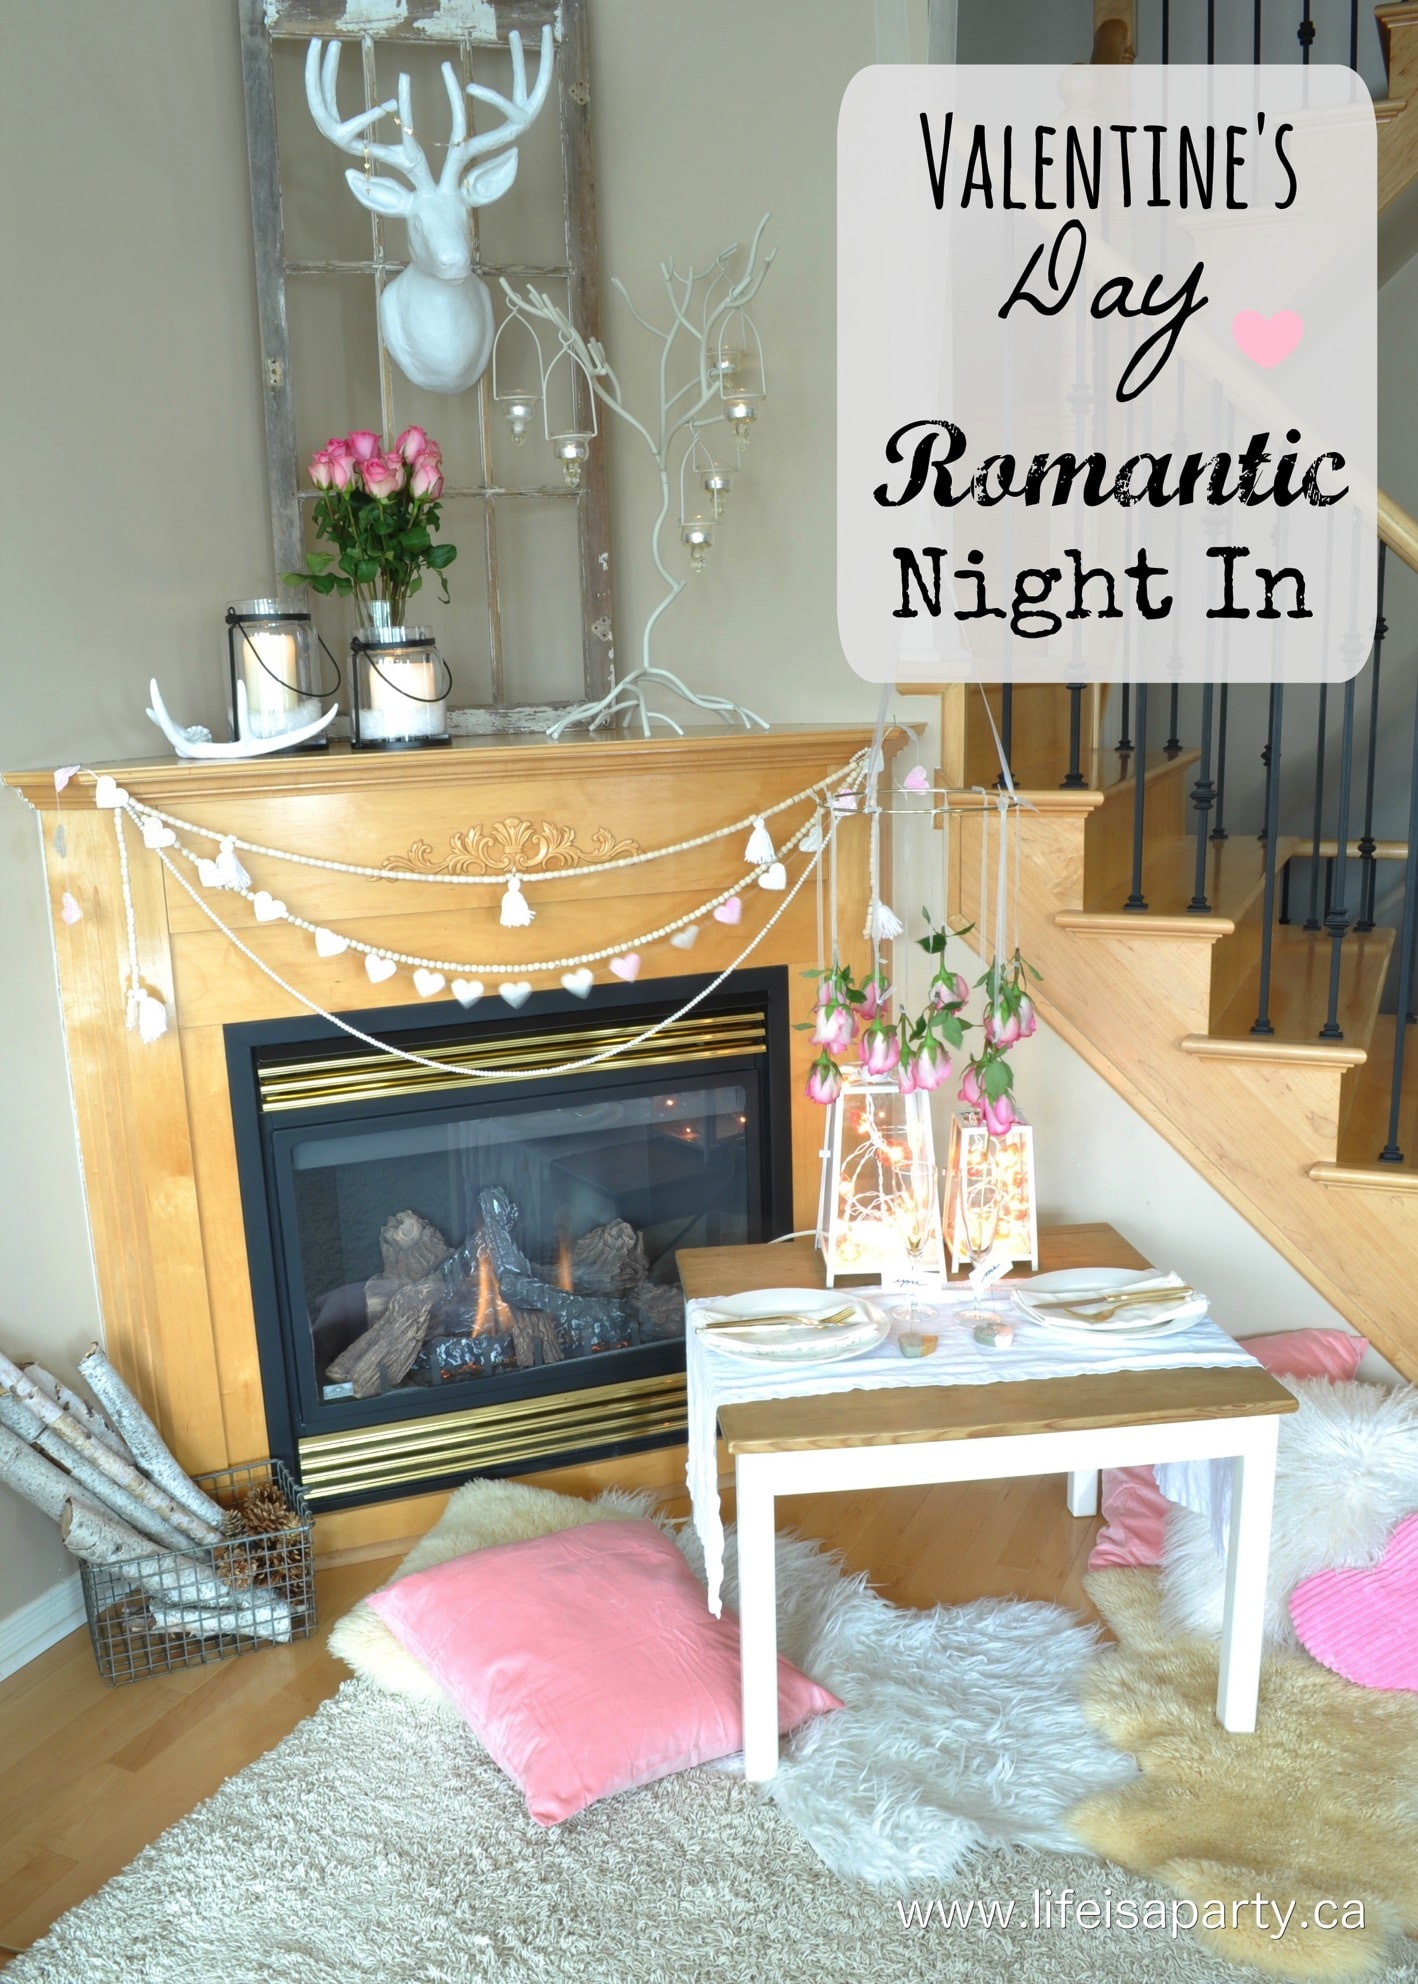 Valentine's Day Romantic Night In: skip the expensive and crowded resturant and enjoy a fireside romantic three-course dinner intimate night in.